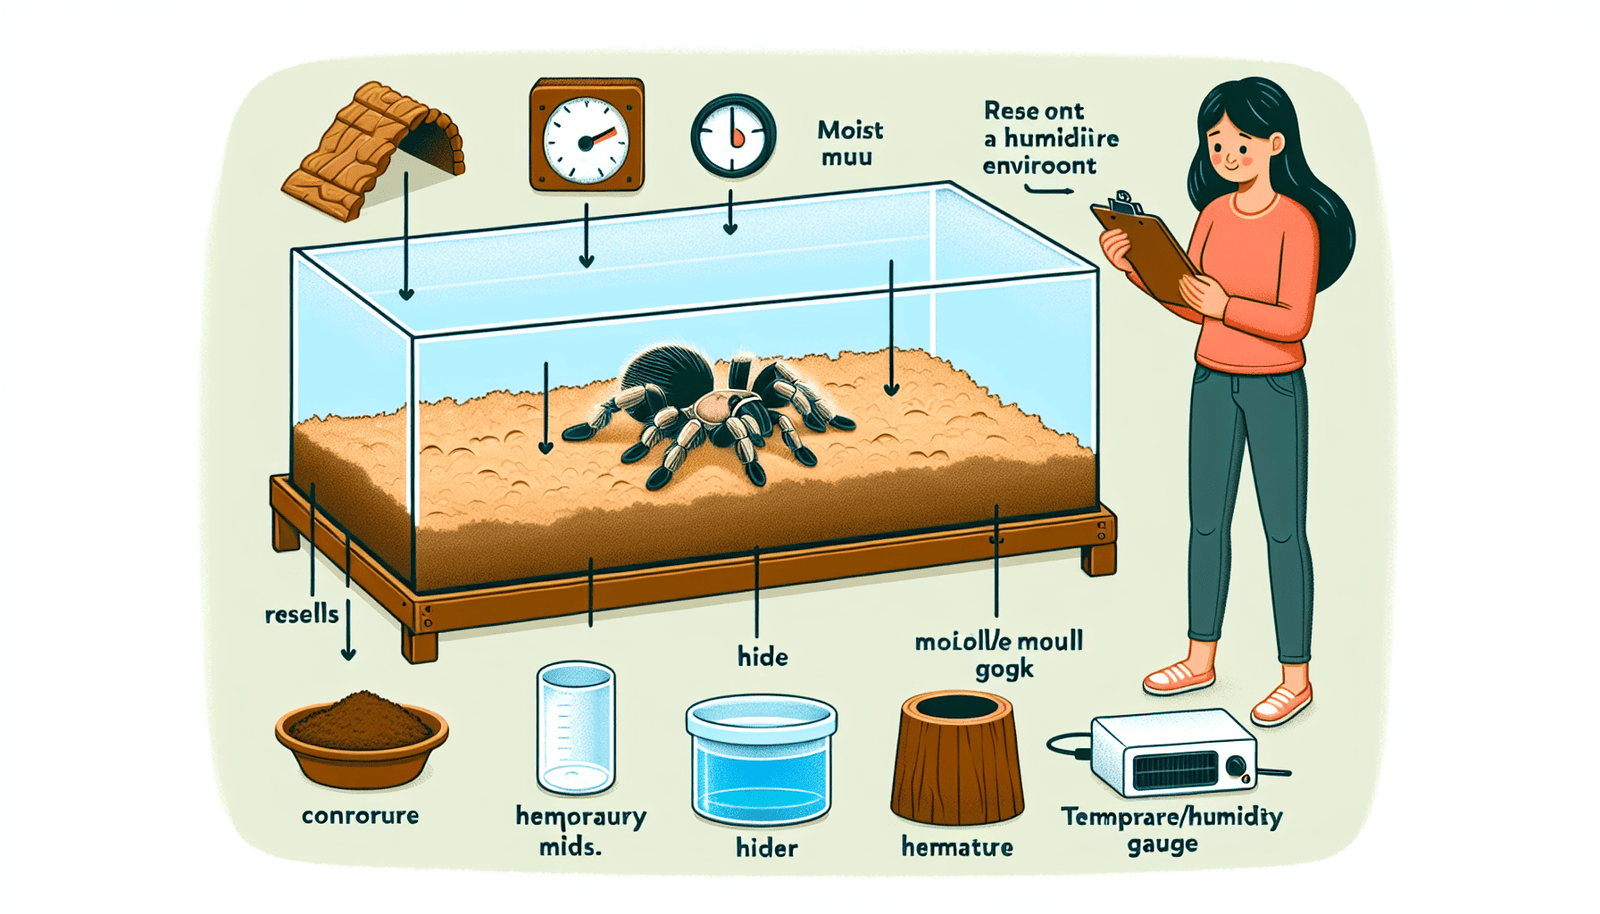 How Do I Prevent And Manage Mold Growth In A Tarantula Enclosure?